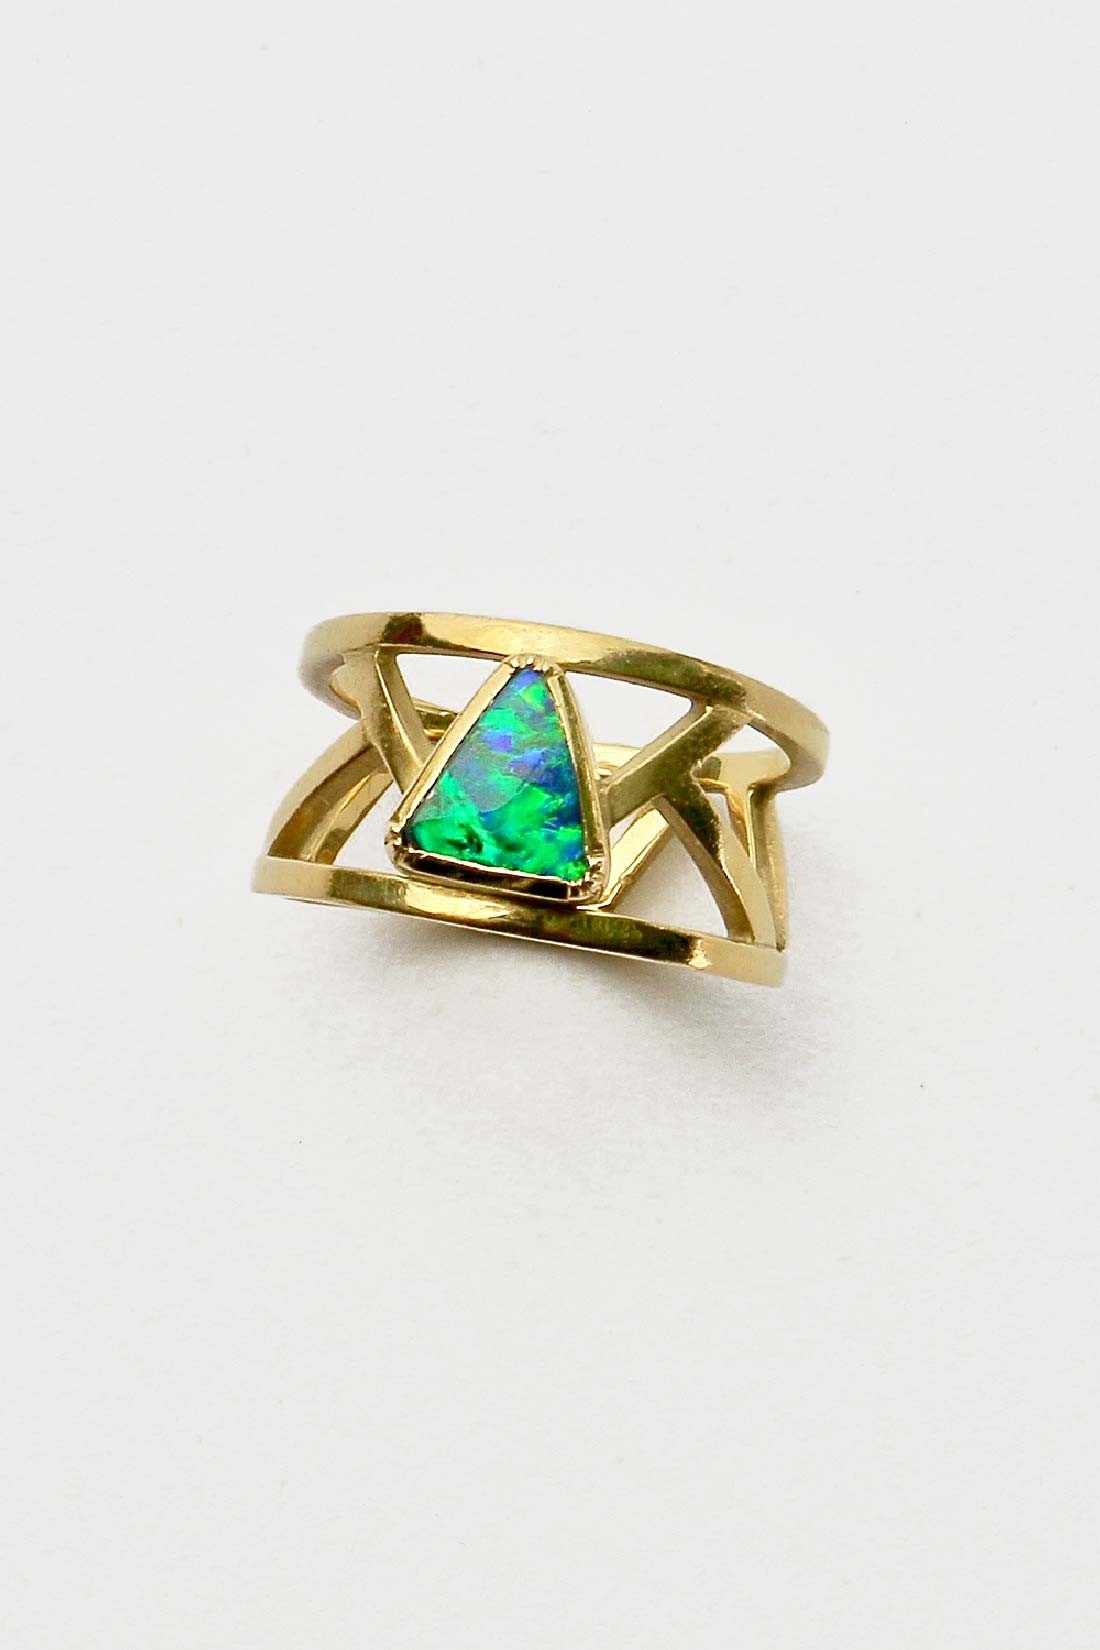 Opal triangle ring by Brooke Gregson